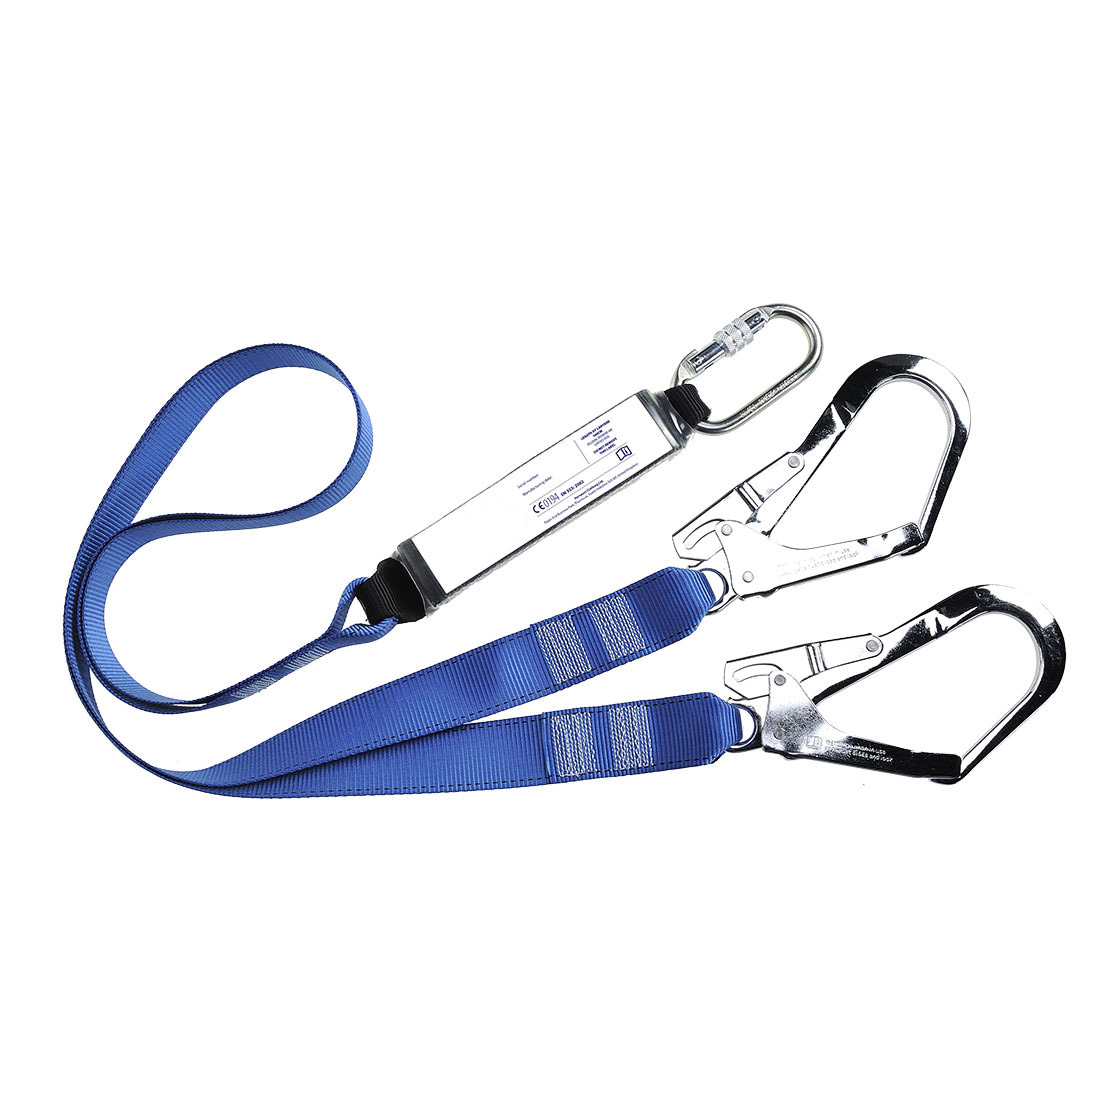 Double Webbing Lanyard With Shock Absorber